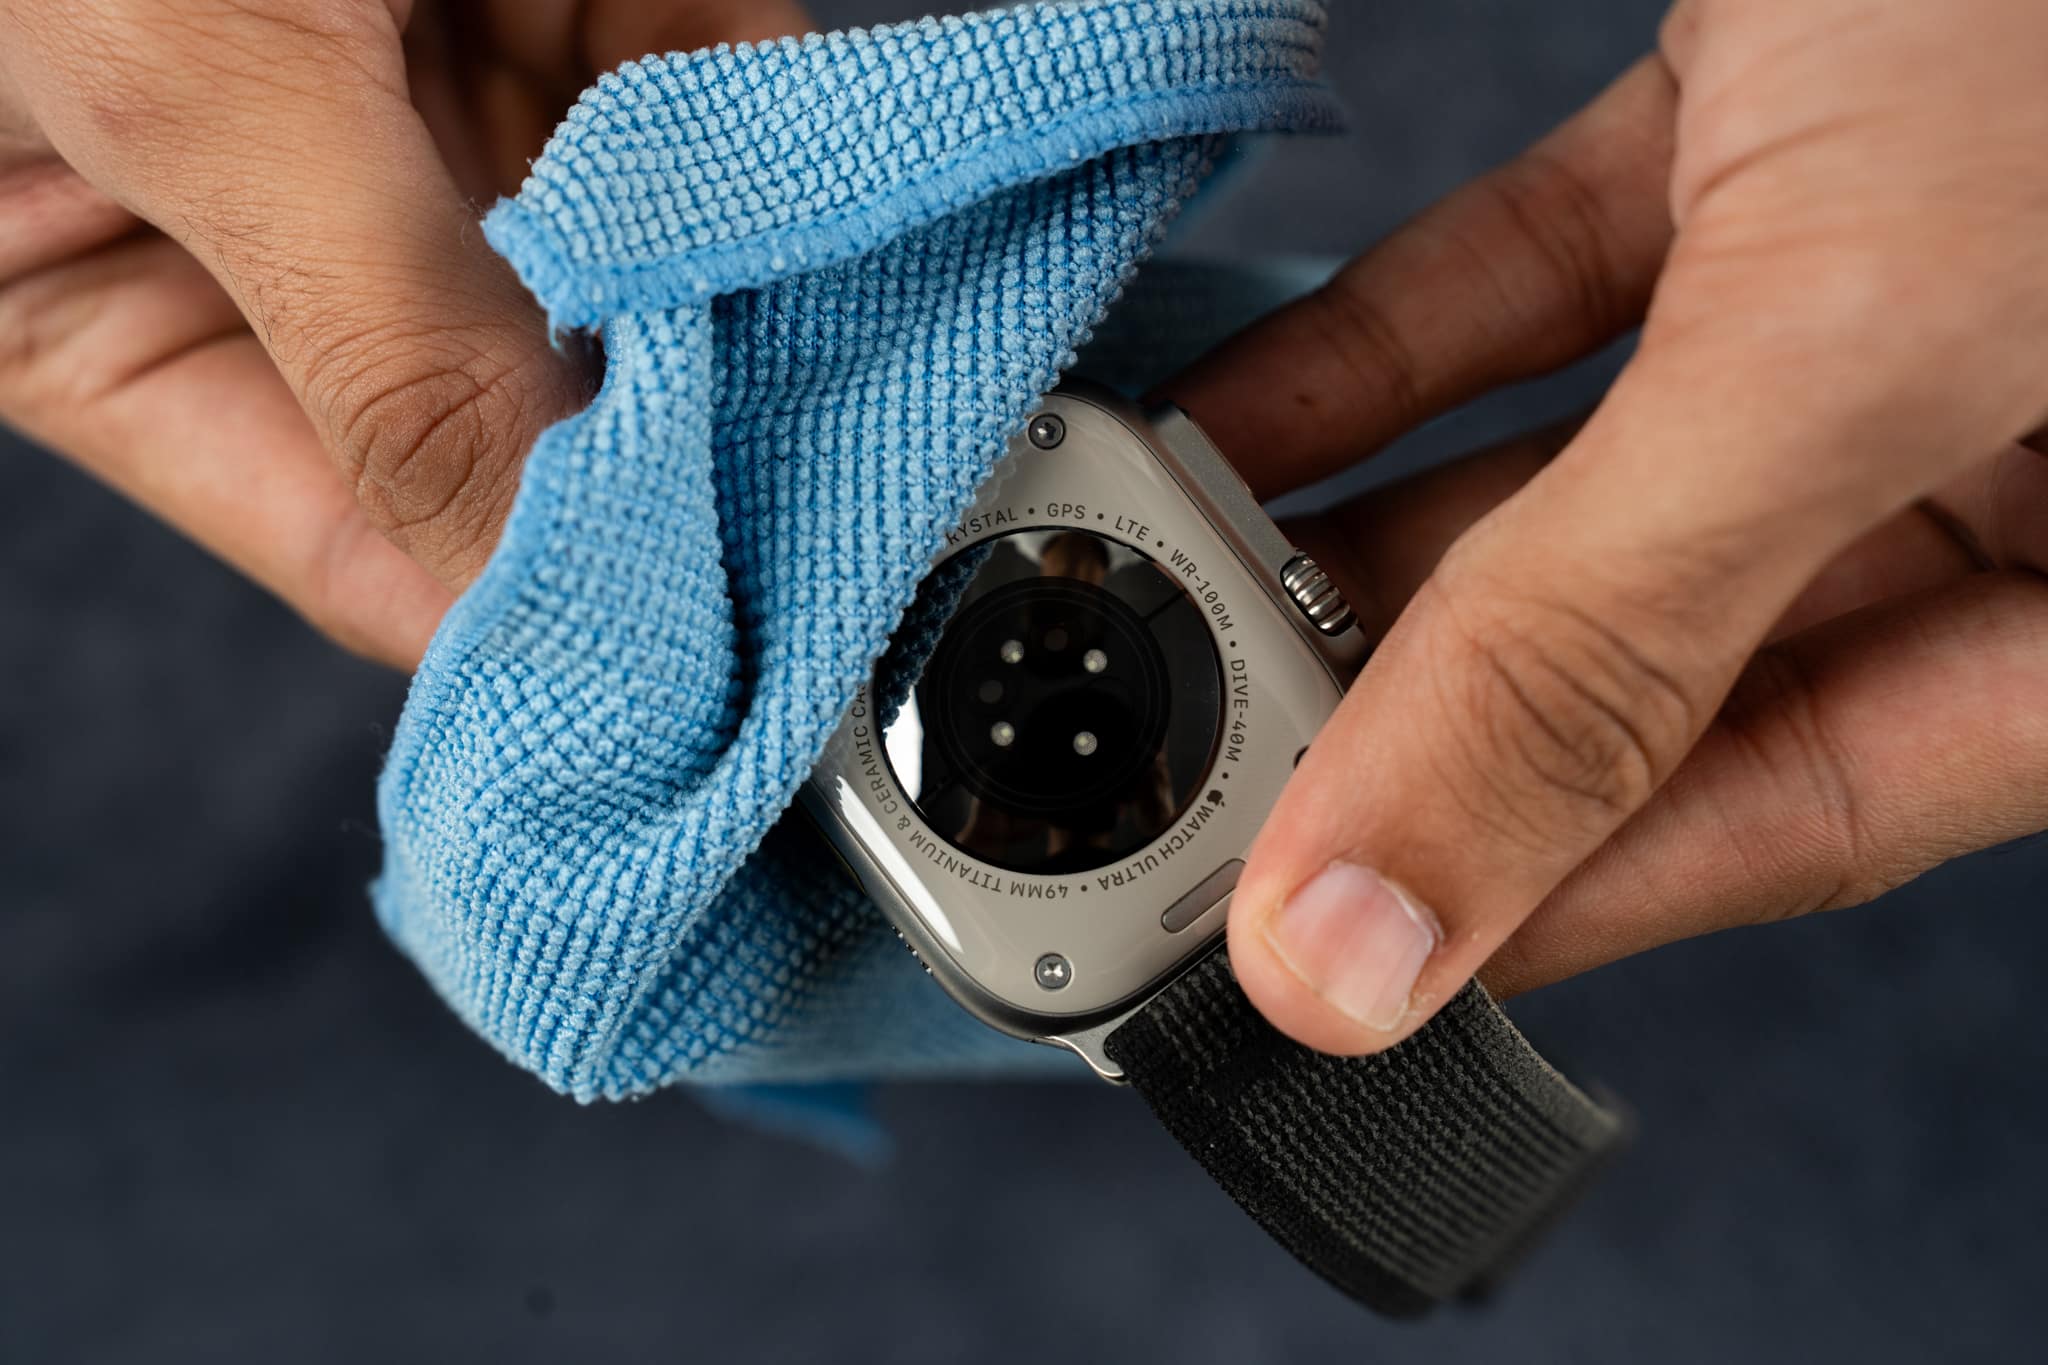 Clean the back of your Apple Watch